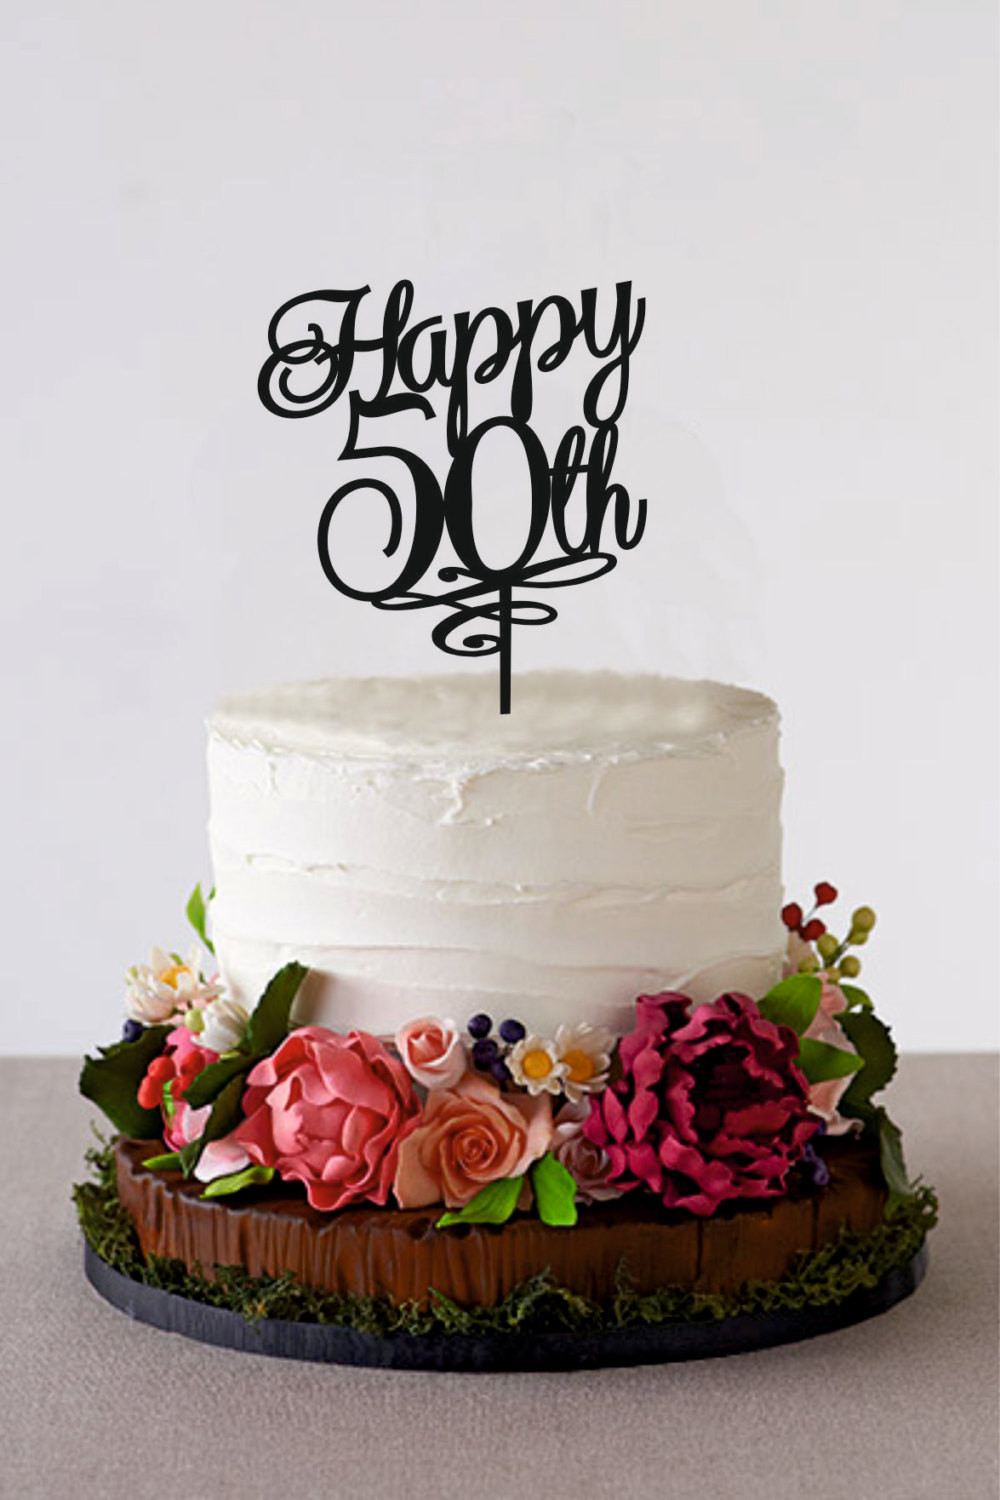 50th Birthday Cake Images
 Happy 50th Birthday Cake Topper 50 Years by HolidayCakeTopper